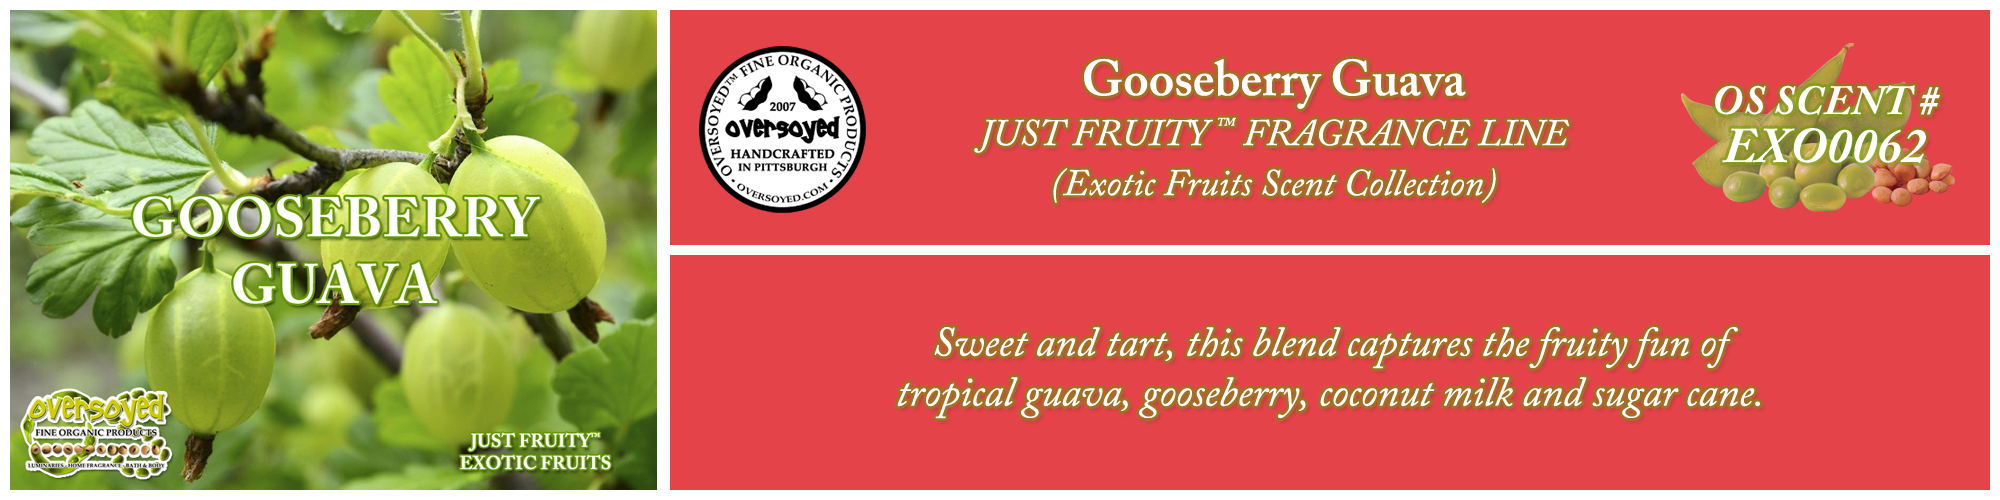 Gooseberry Guava Handcrafted Products Collection